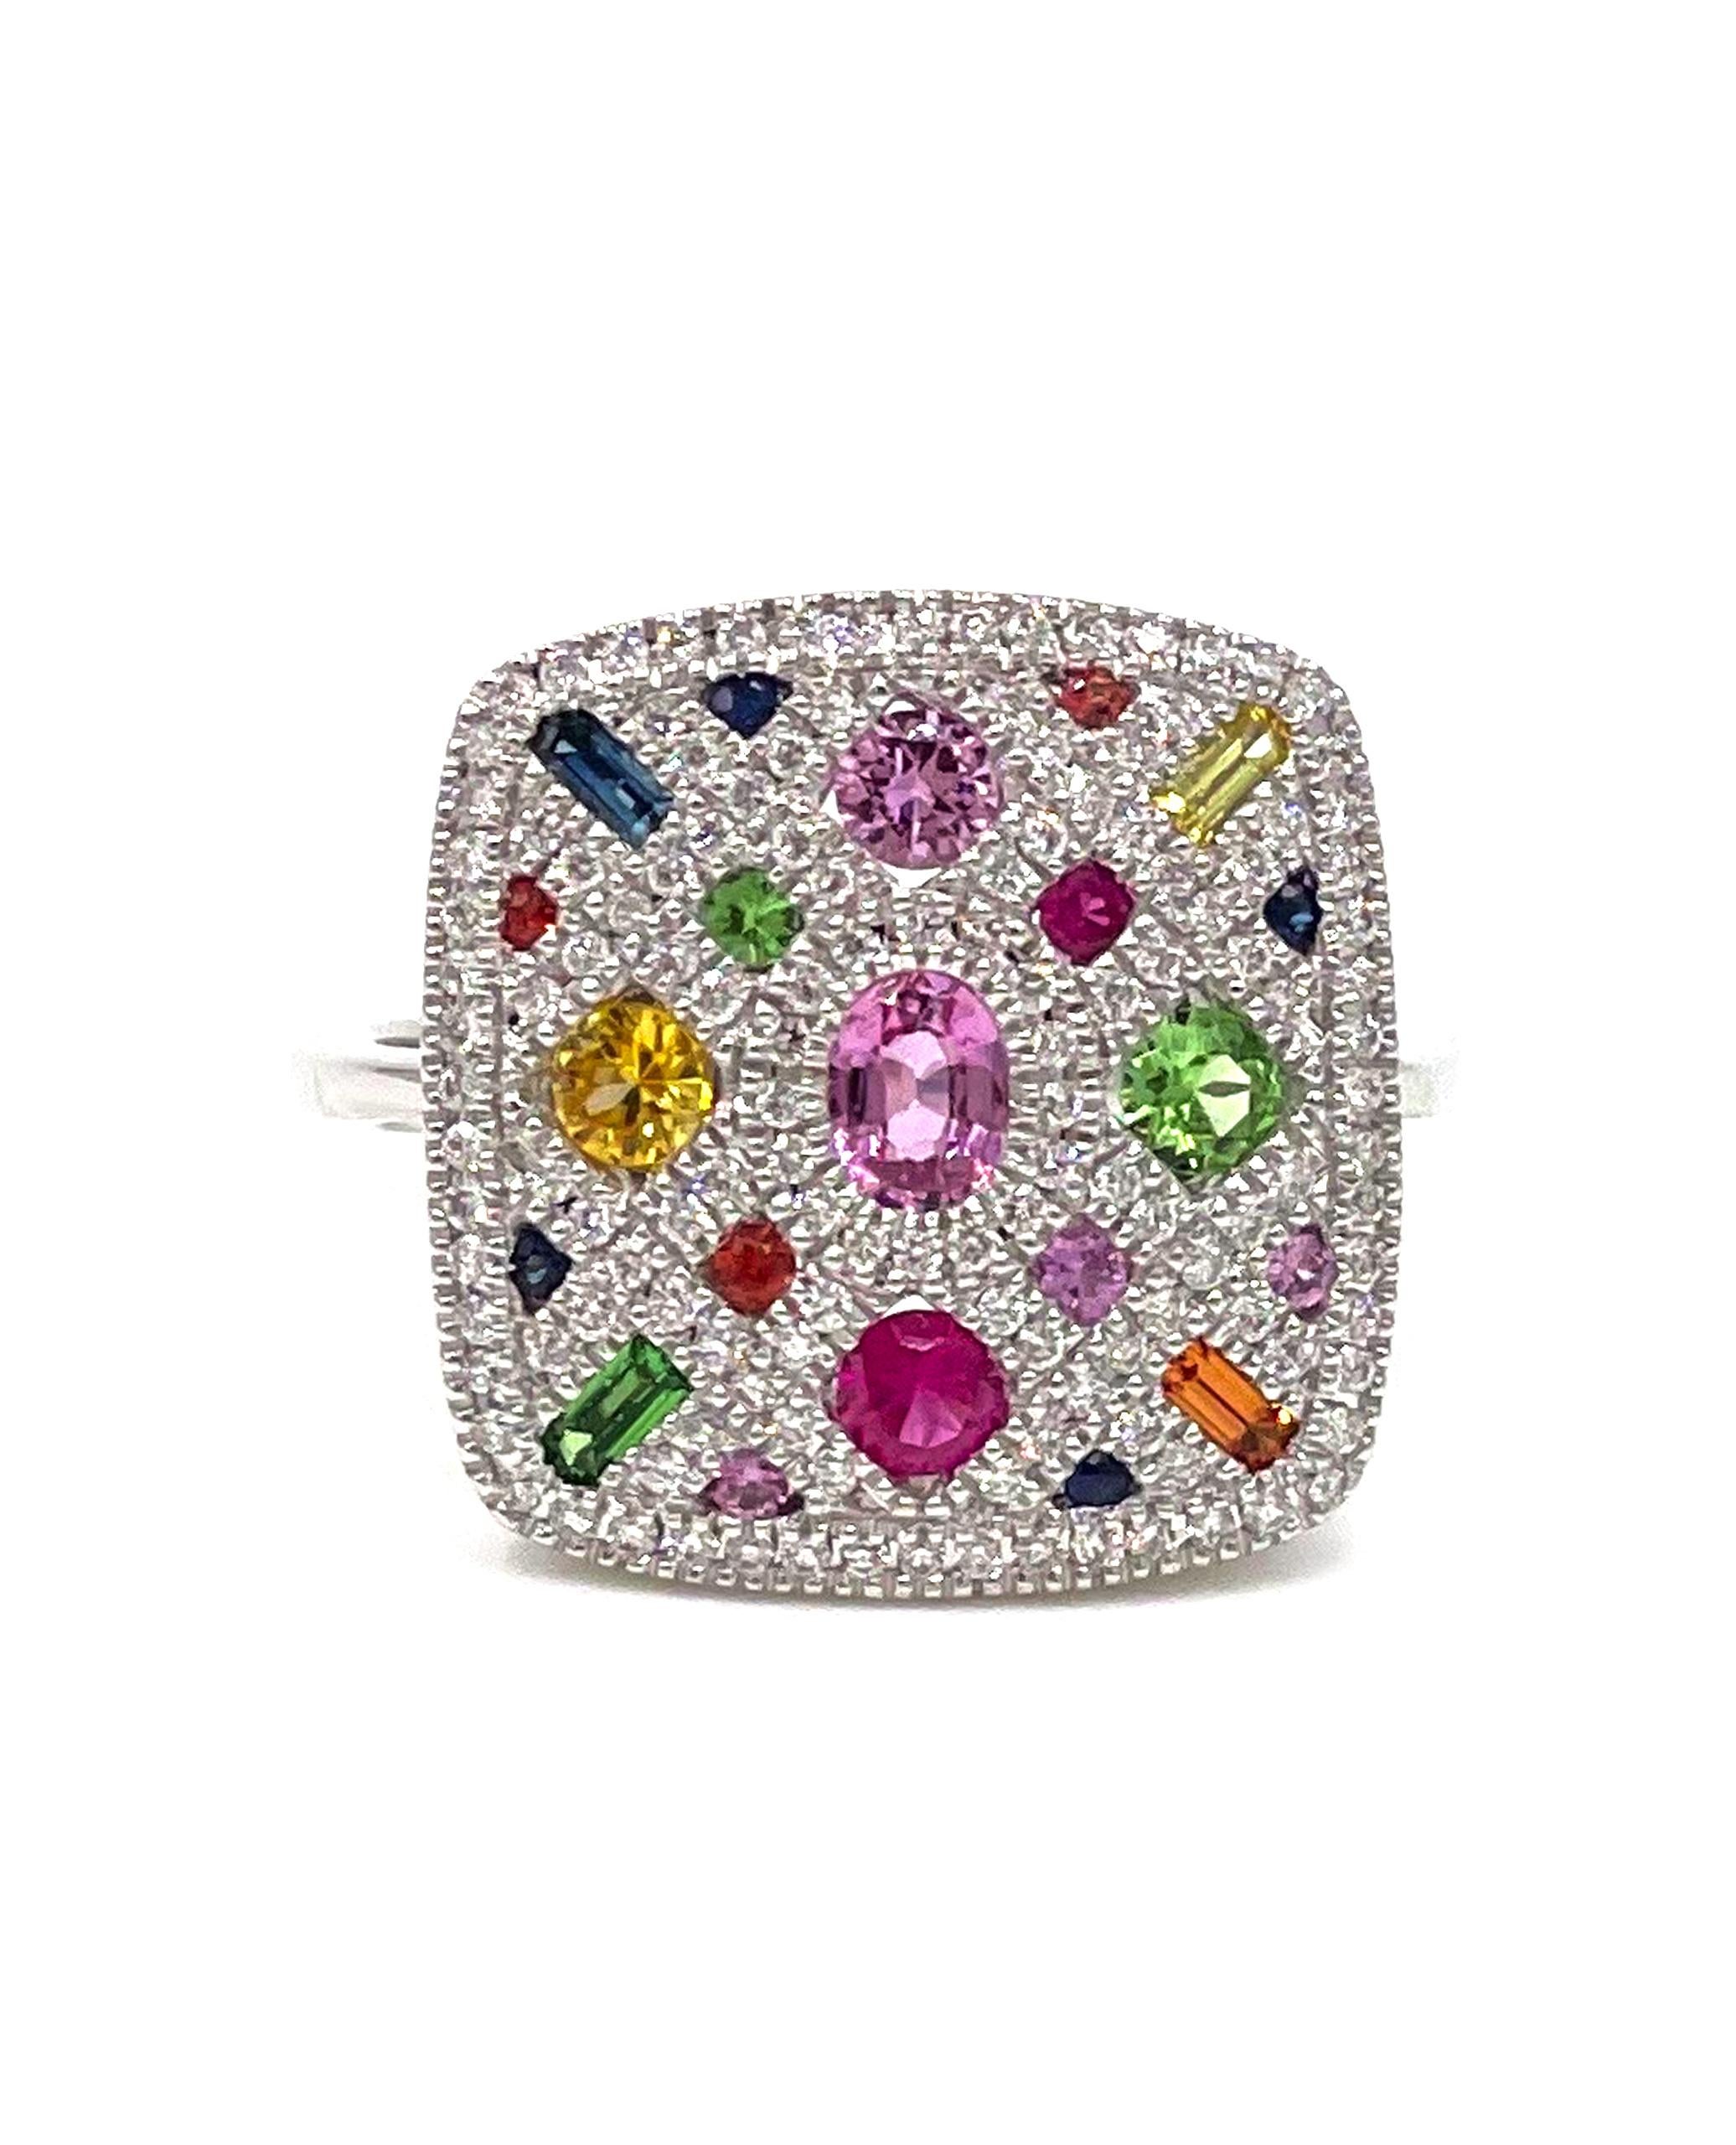 Allison Kaufman 14K white gold square shape ring with 0.38 carat diamonds and multi colored sapphires, ruby and garnet 0.99 carats total weight.

- Finger size 7 (can be sized upon request)